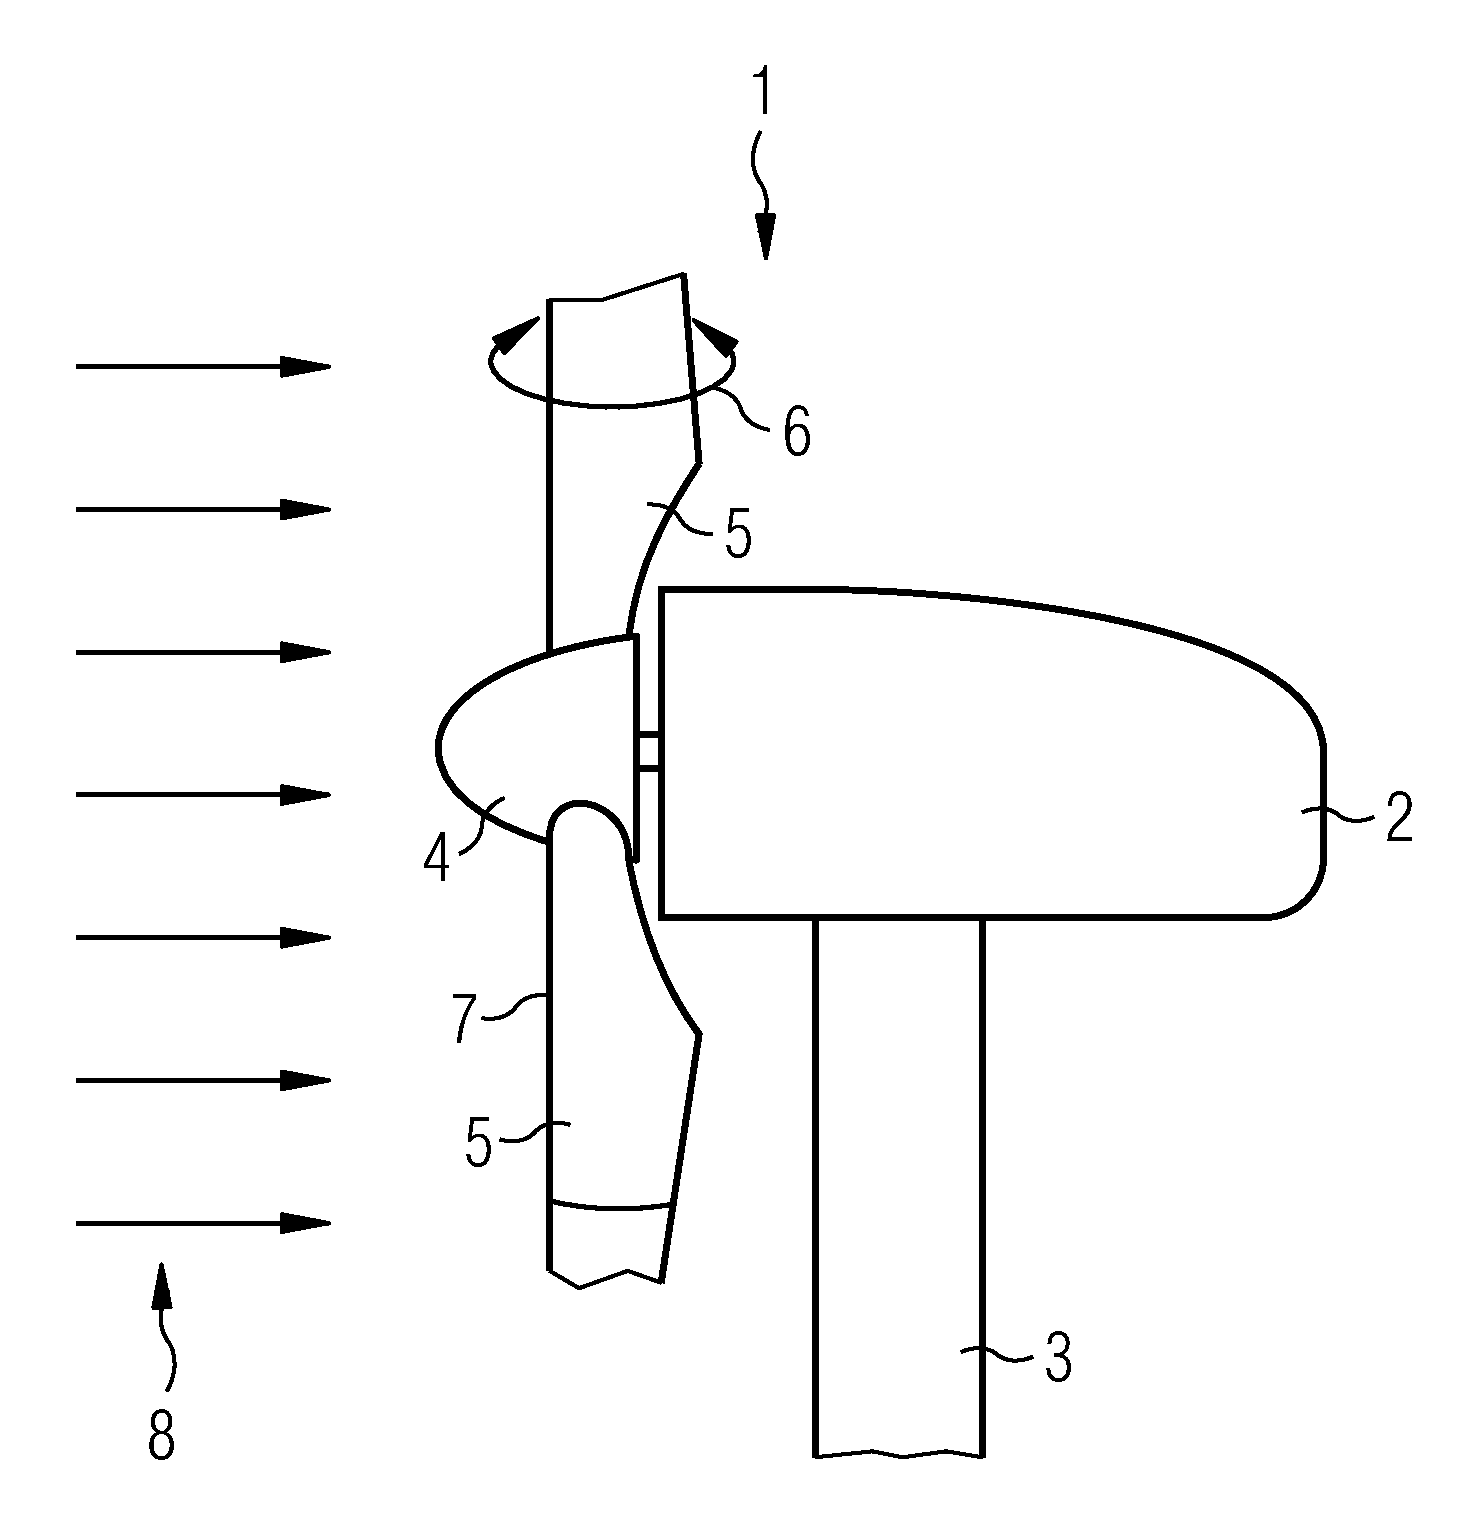 Wind energy installation comprising a wind speed measuring system